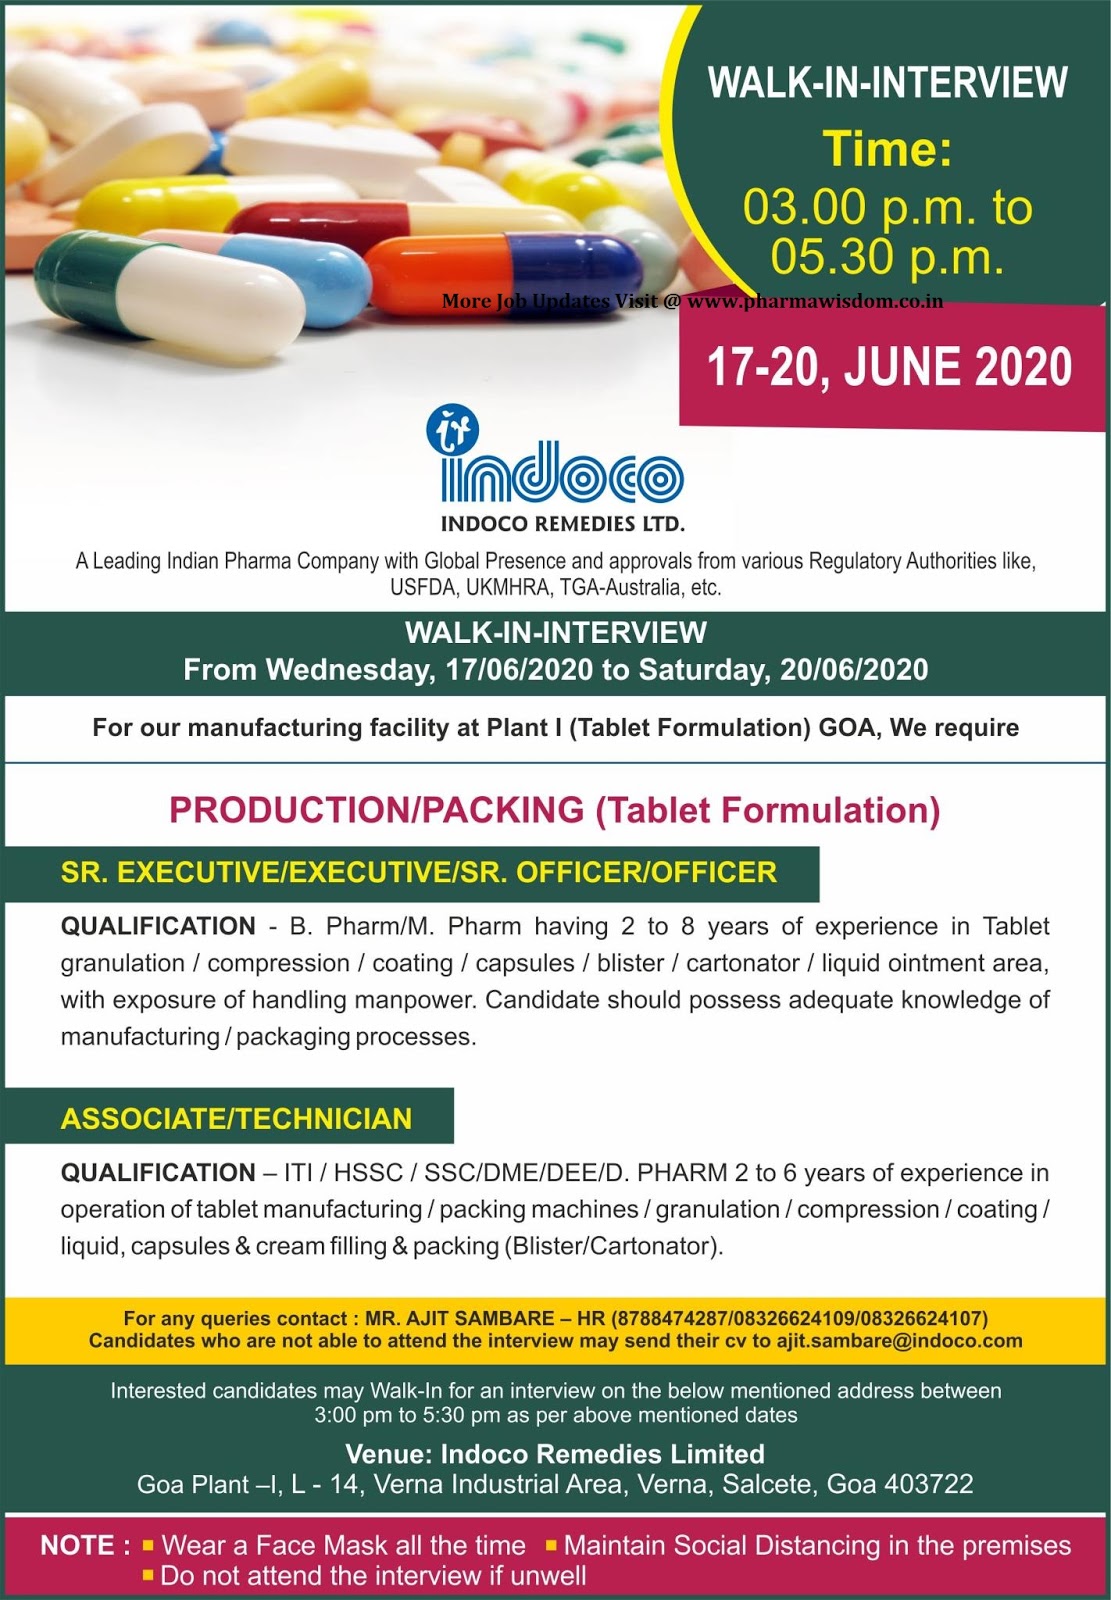 INDOCO REMEDIES LTD - Walk-In Interviews for 17th - 20th June' 2020 ...